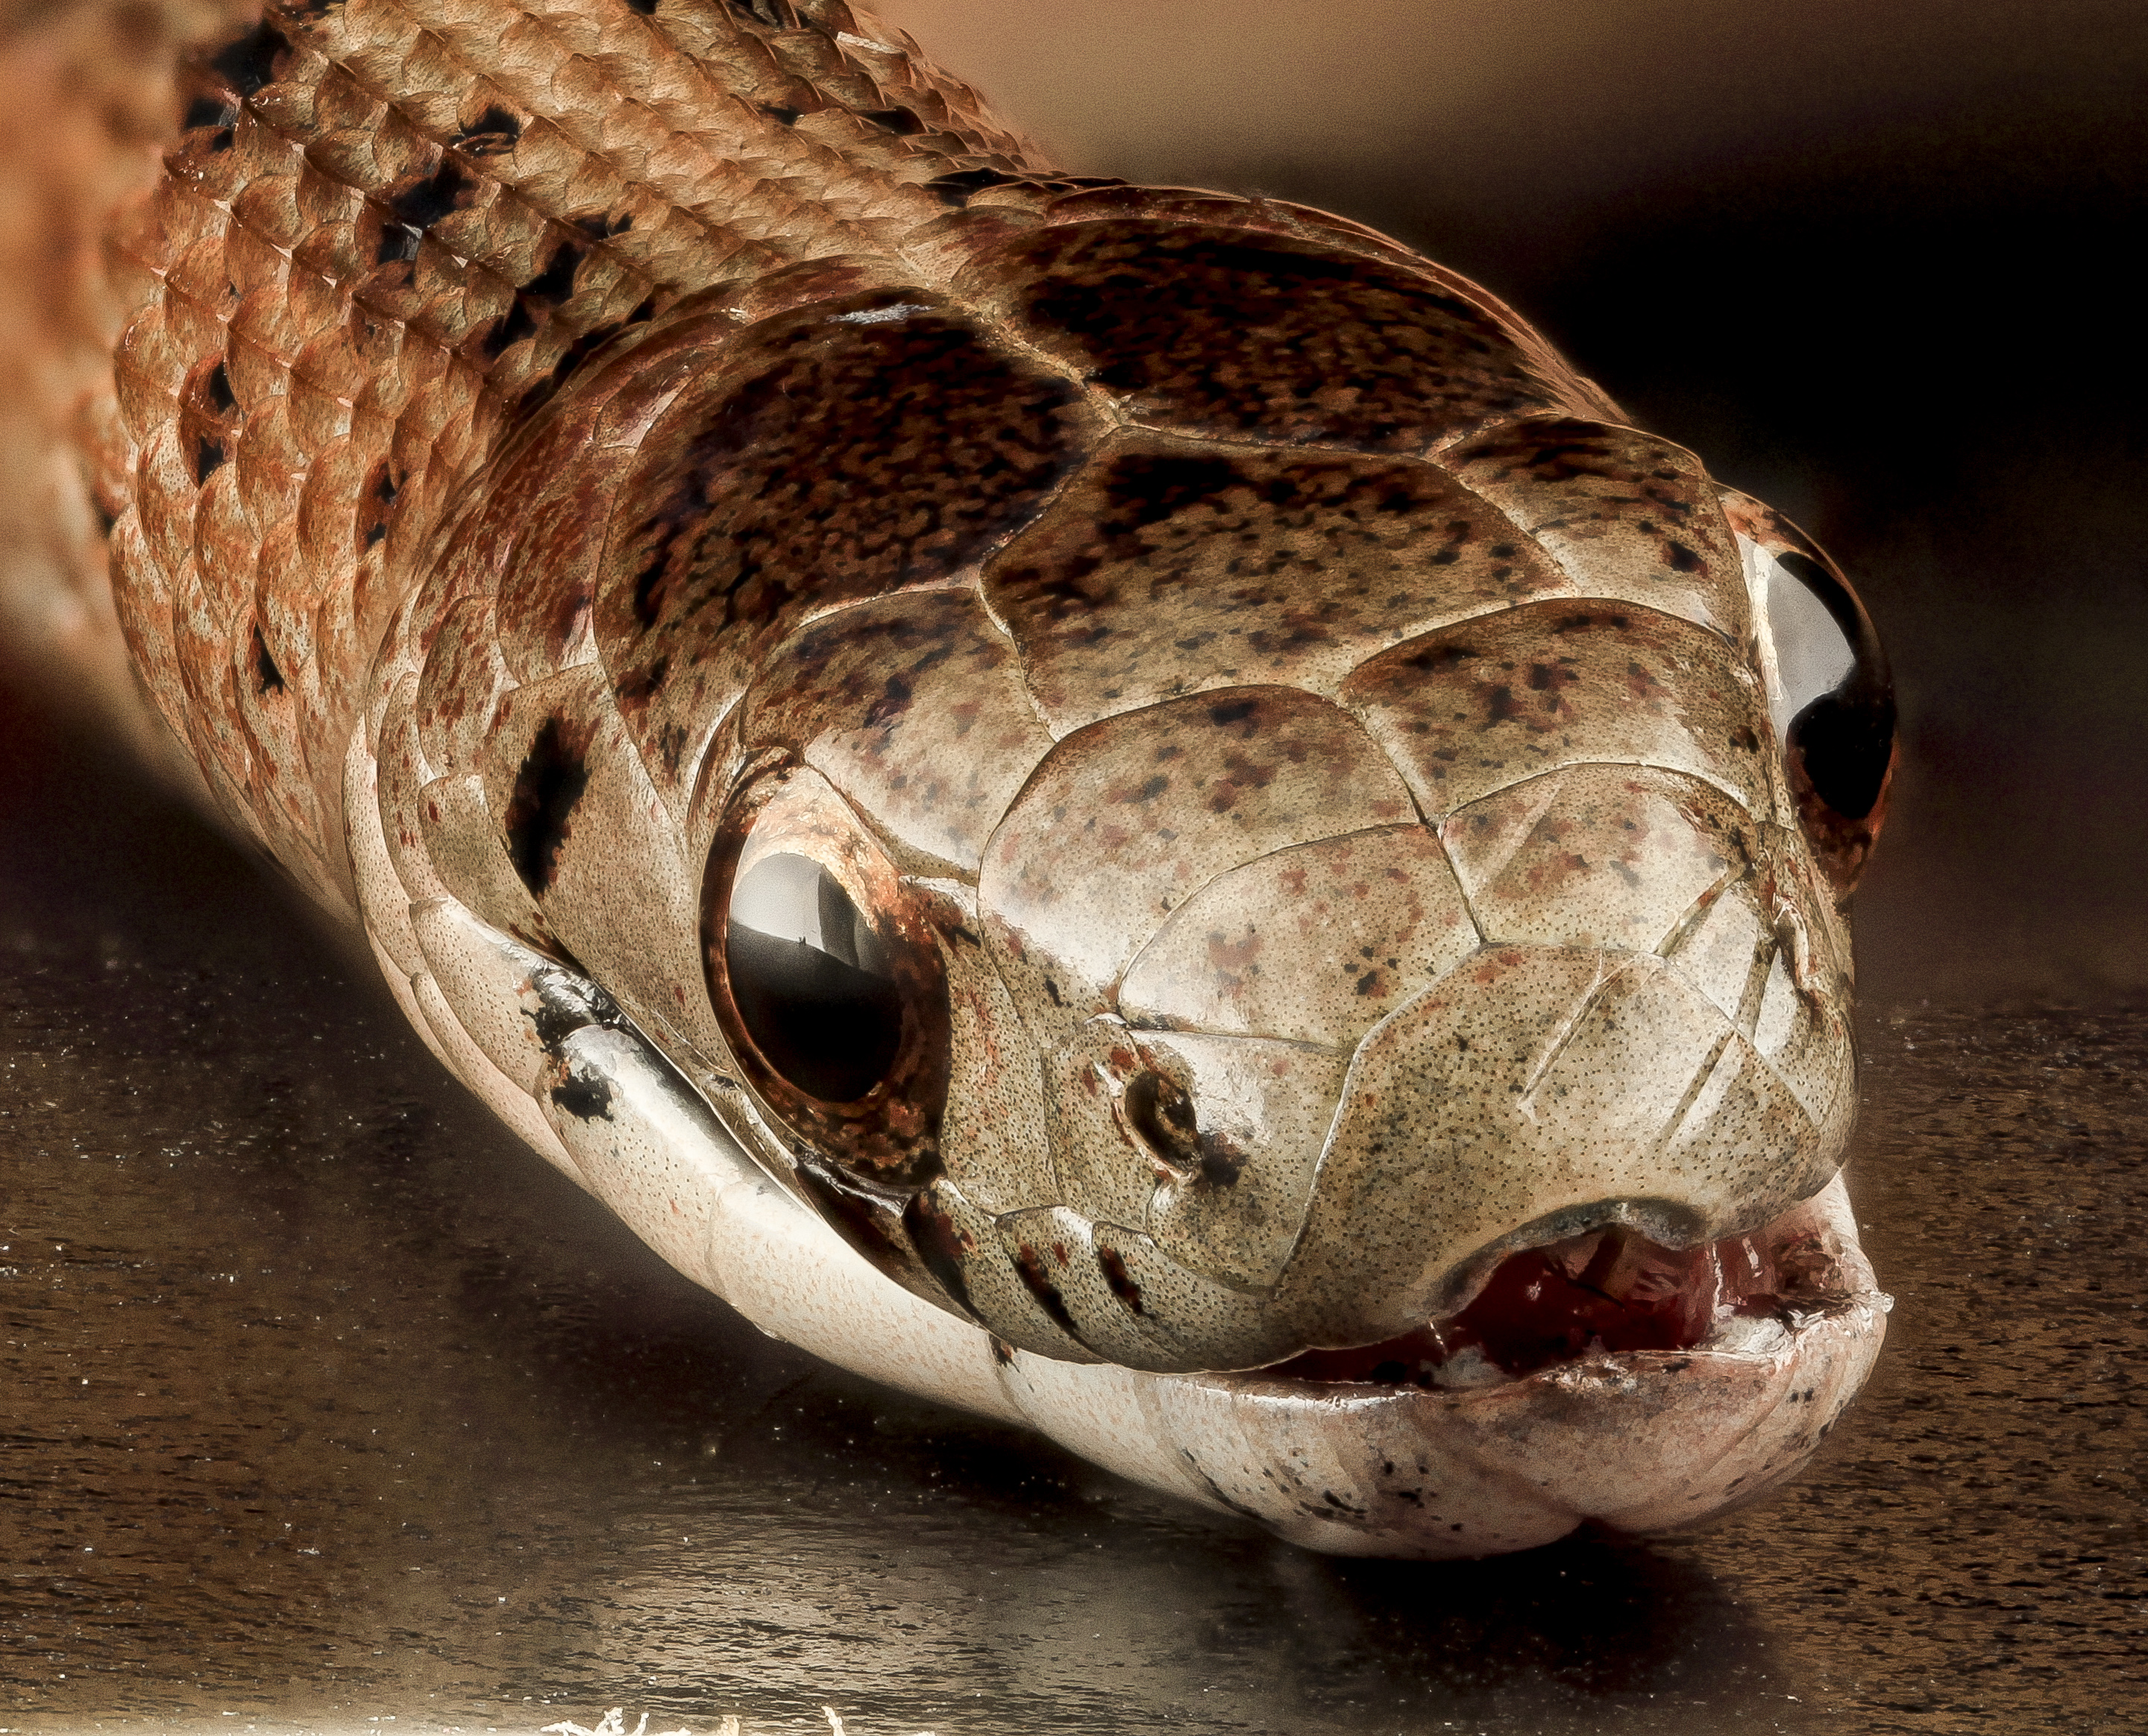 Brown Snake, U, Sde, MD, PG County 2013-08-05-16.58.29 ZS PMax (9446048309)